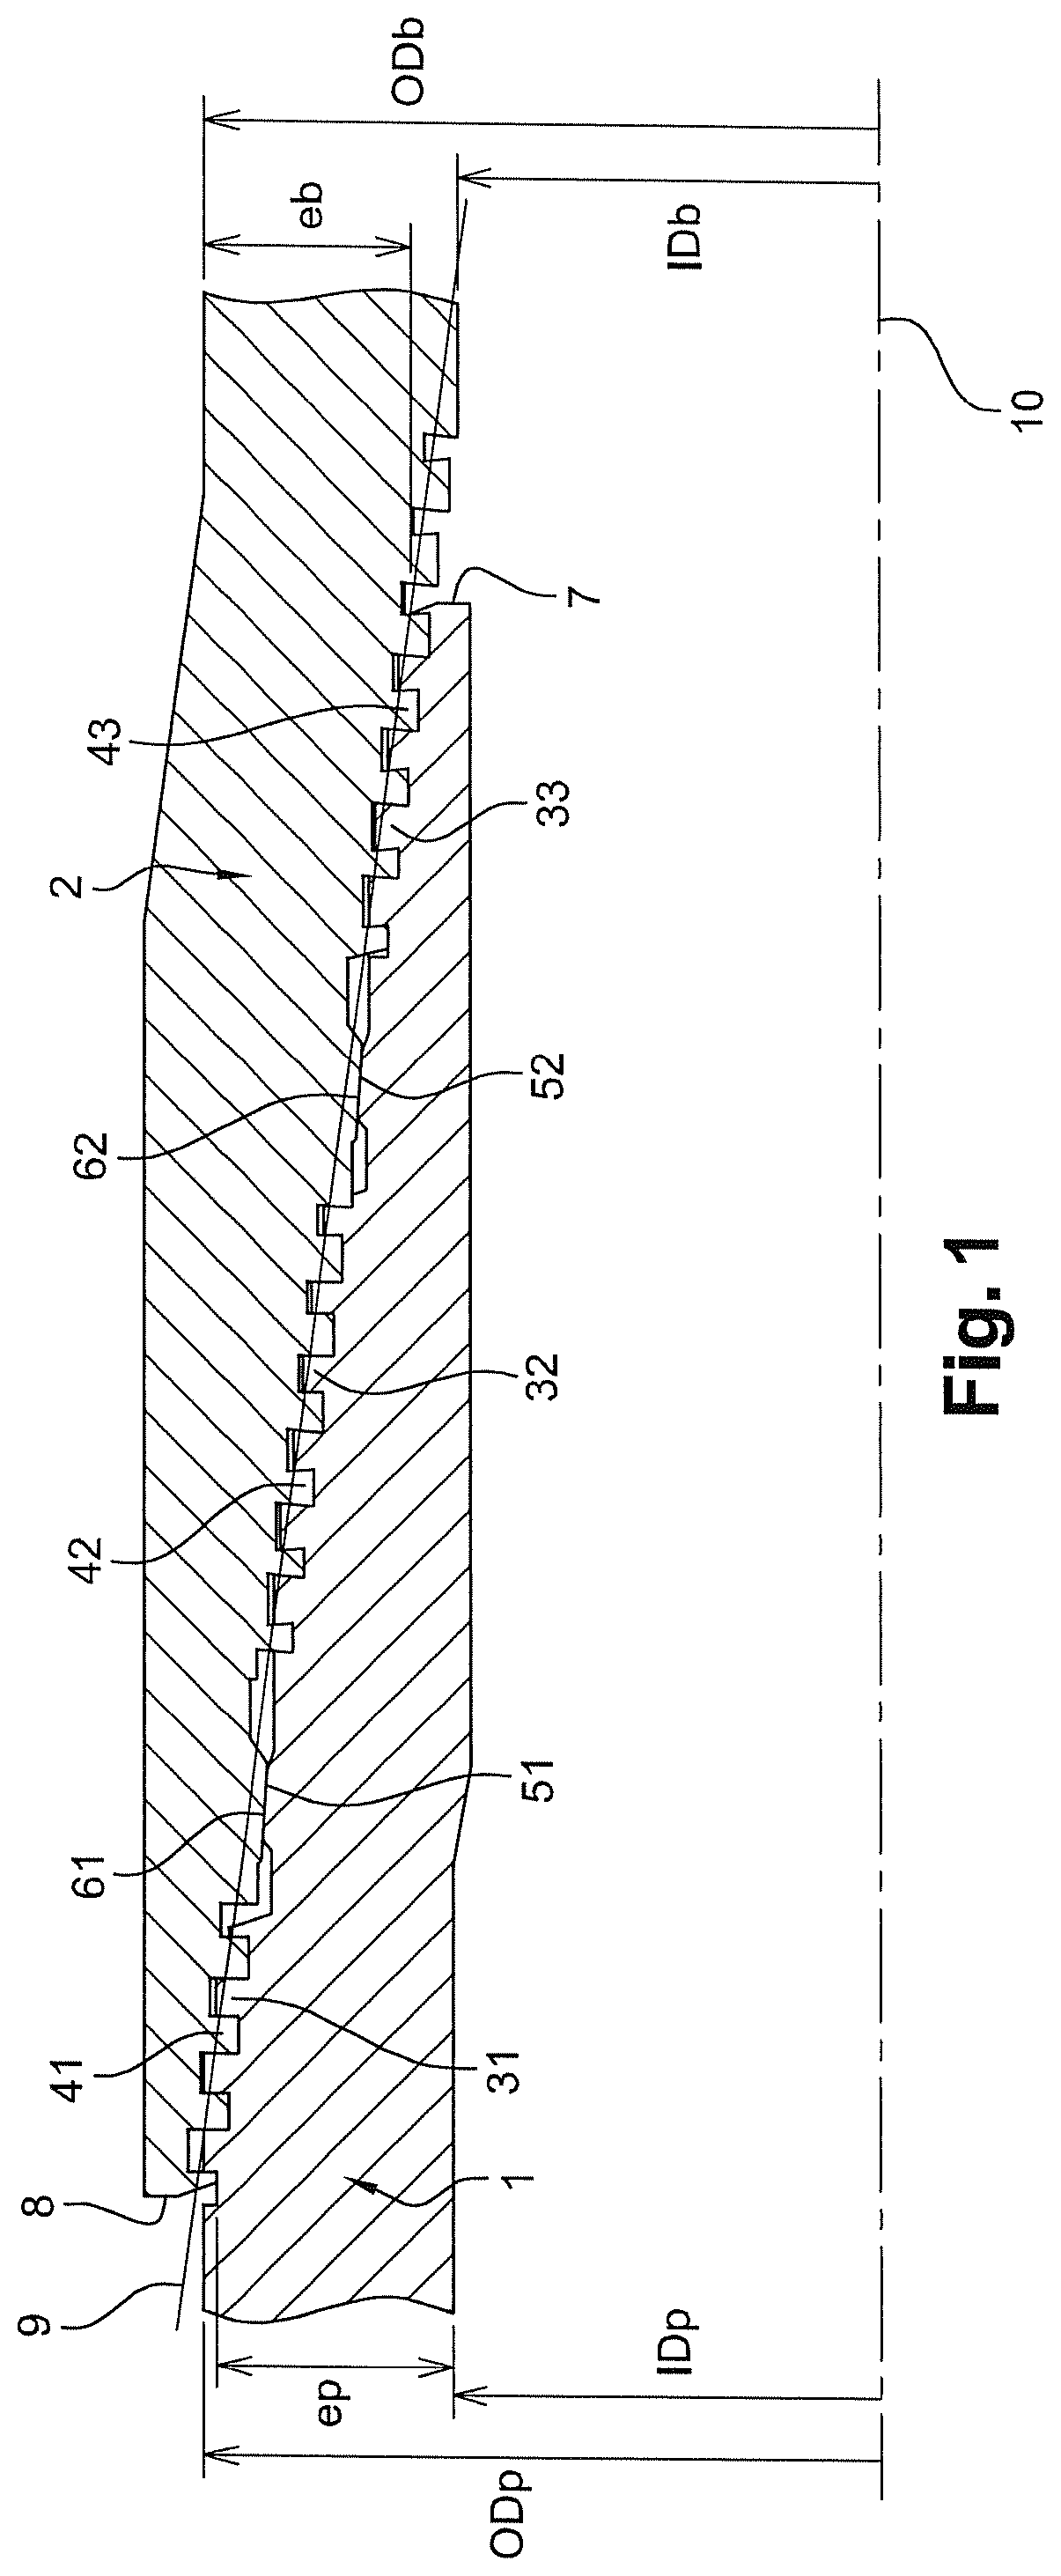 Assembly for producing a threaded connection for drilling and operating hydrocarbon wells, and resulting threaded connection